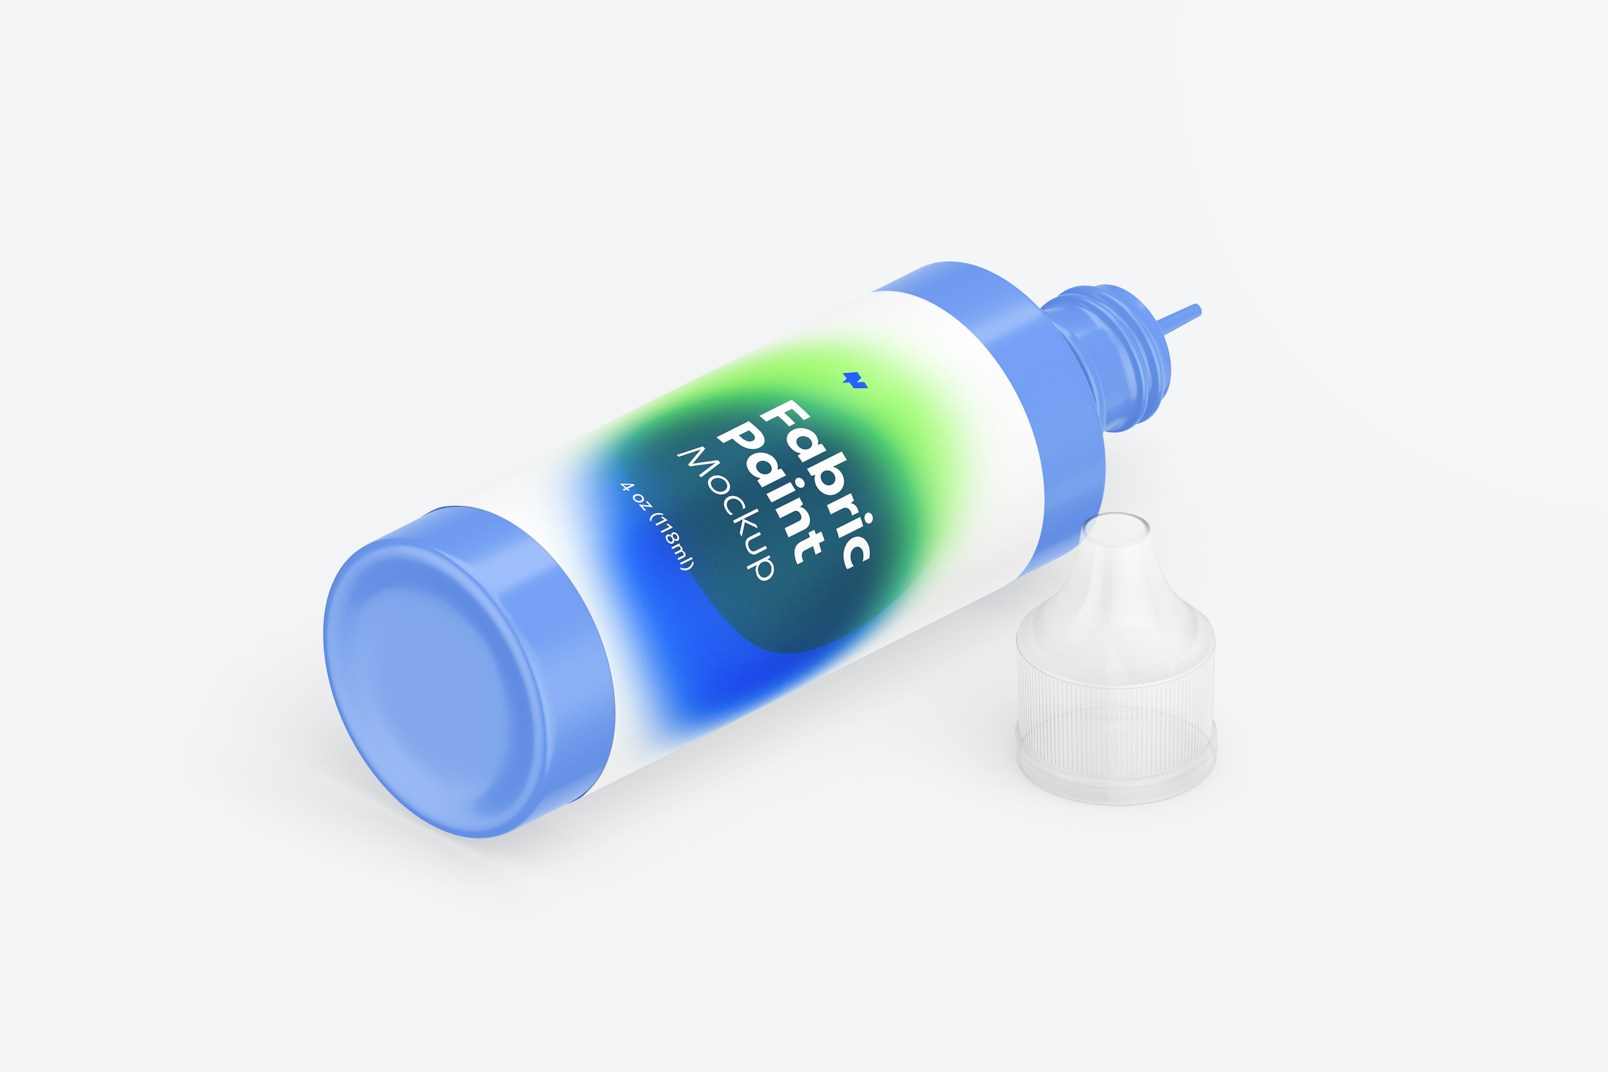 4 oz Fabric Paint Bottle Mockup, Isometric Right View